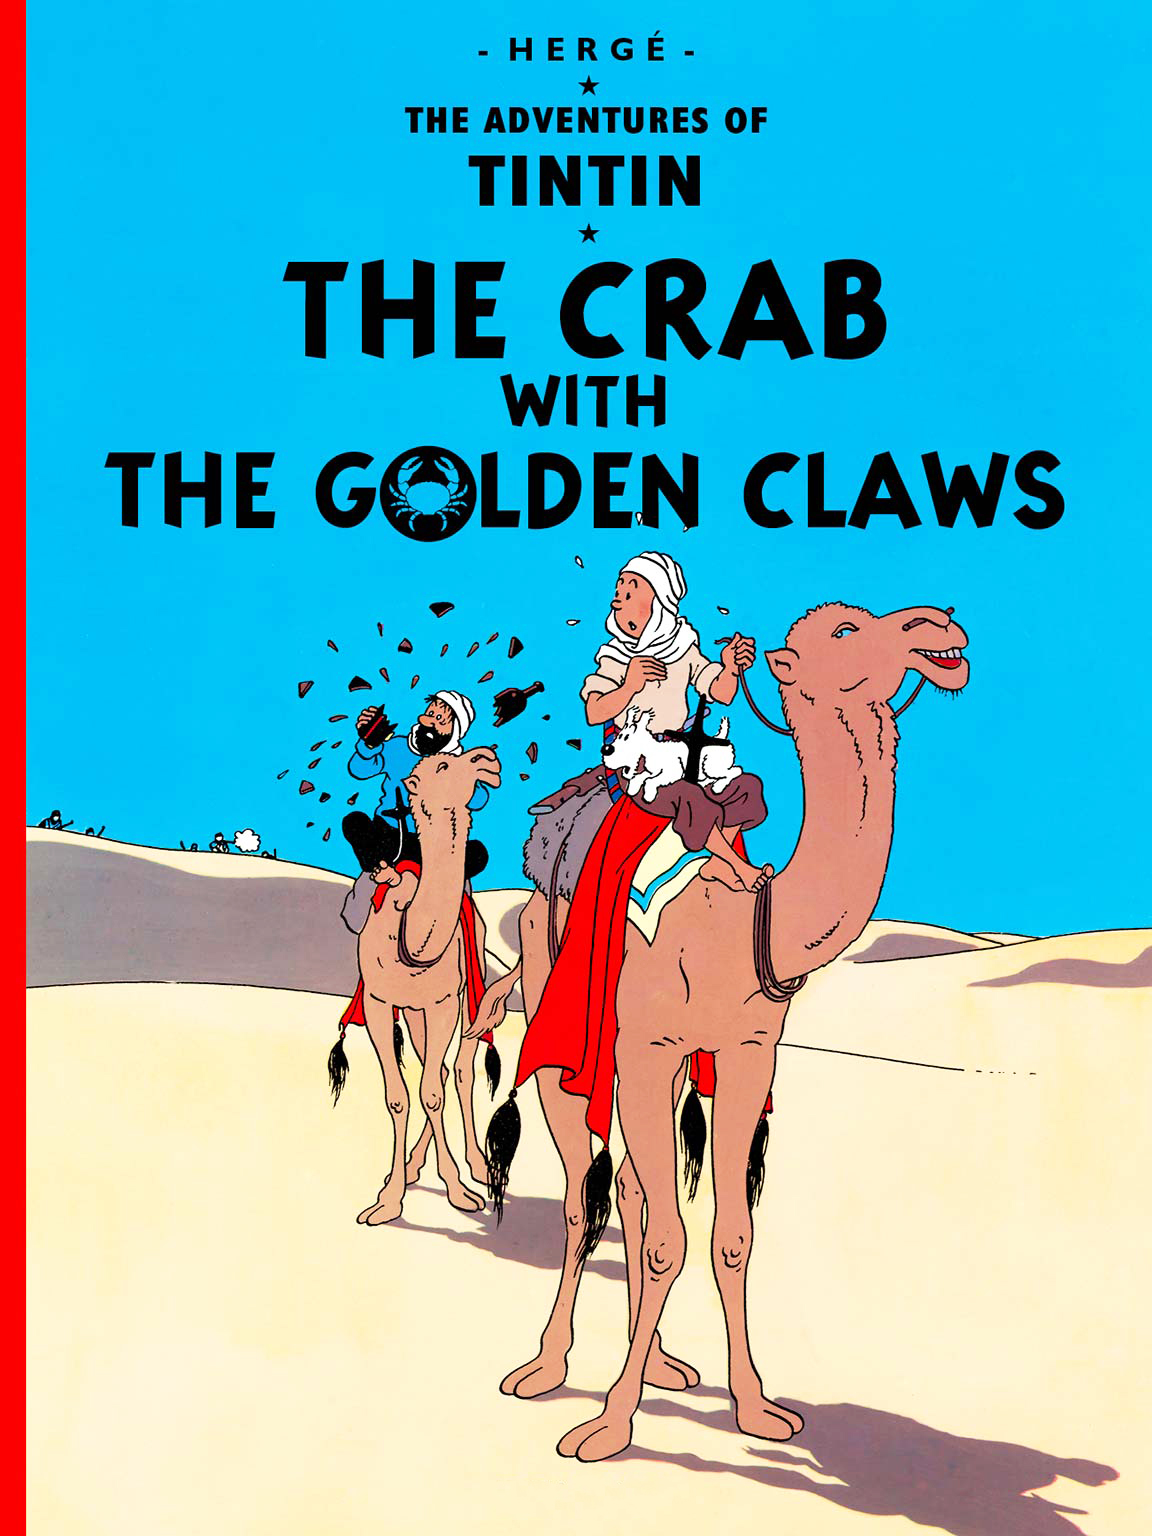 TINTIN: The Crab with The Golden Claws (পেপারব্যাক)